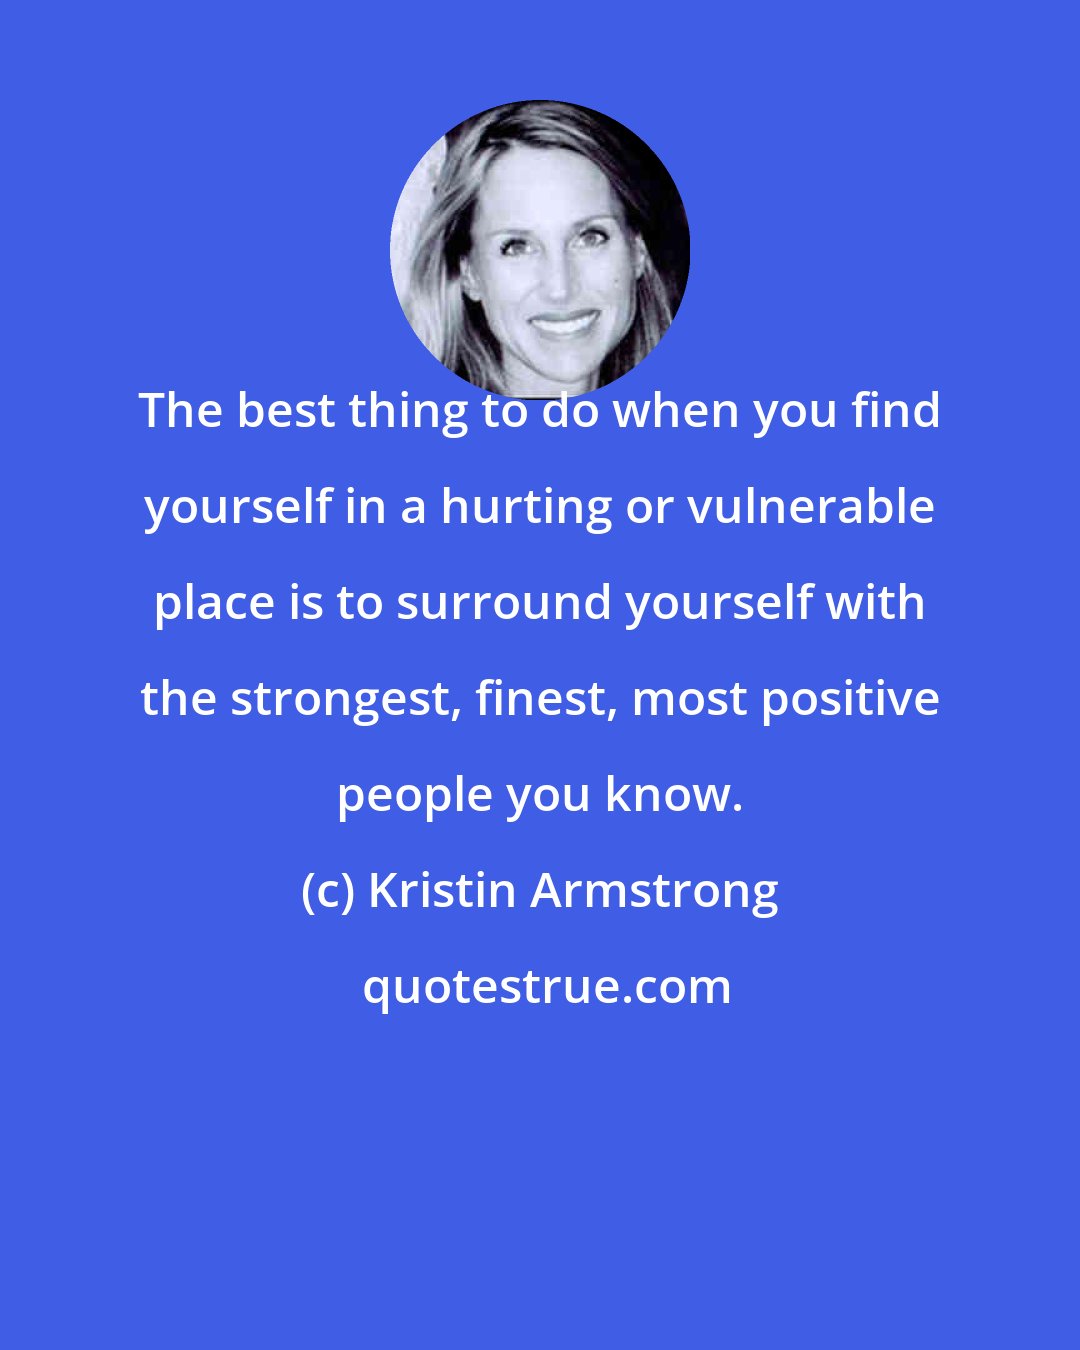 Kristin Armstrong: The best thing to do when you find yourself in a hurting or vulnerable place is to surround yourself with the strongest, finest, most positive people you know.